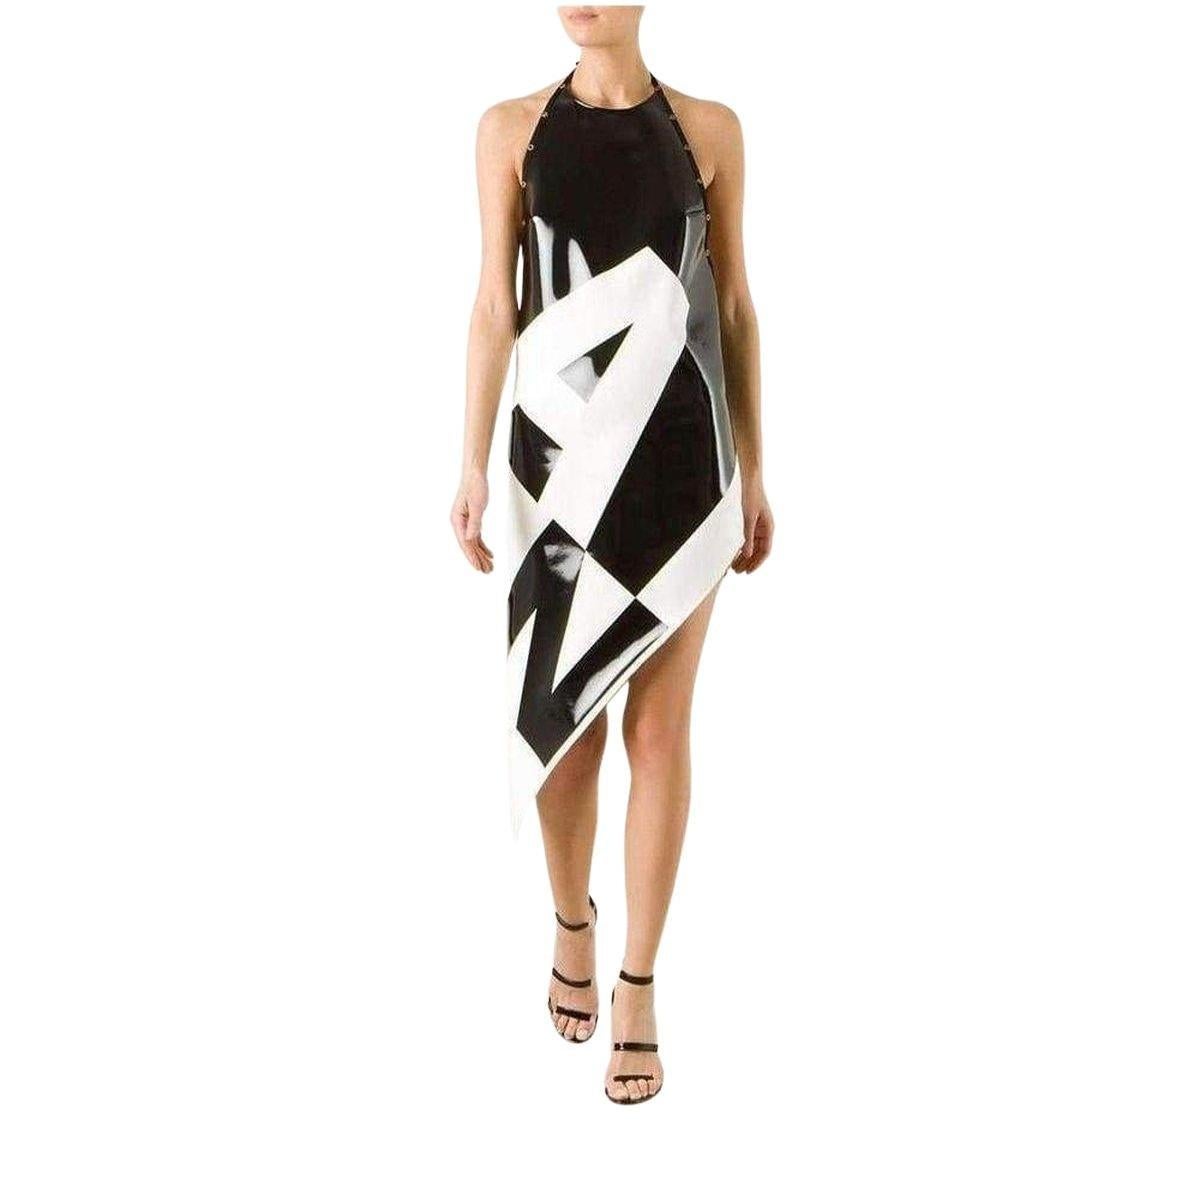 Anthony Vaccarello Asymmetrical Coated Crepe Dress FR 38 In New Condition For Sale In Brossard, QC